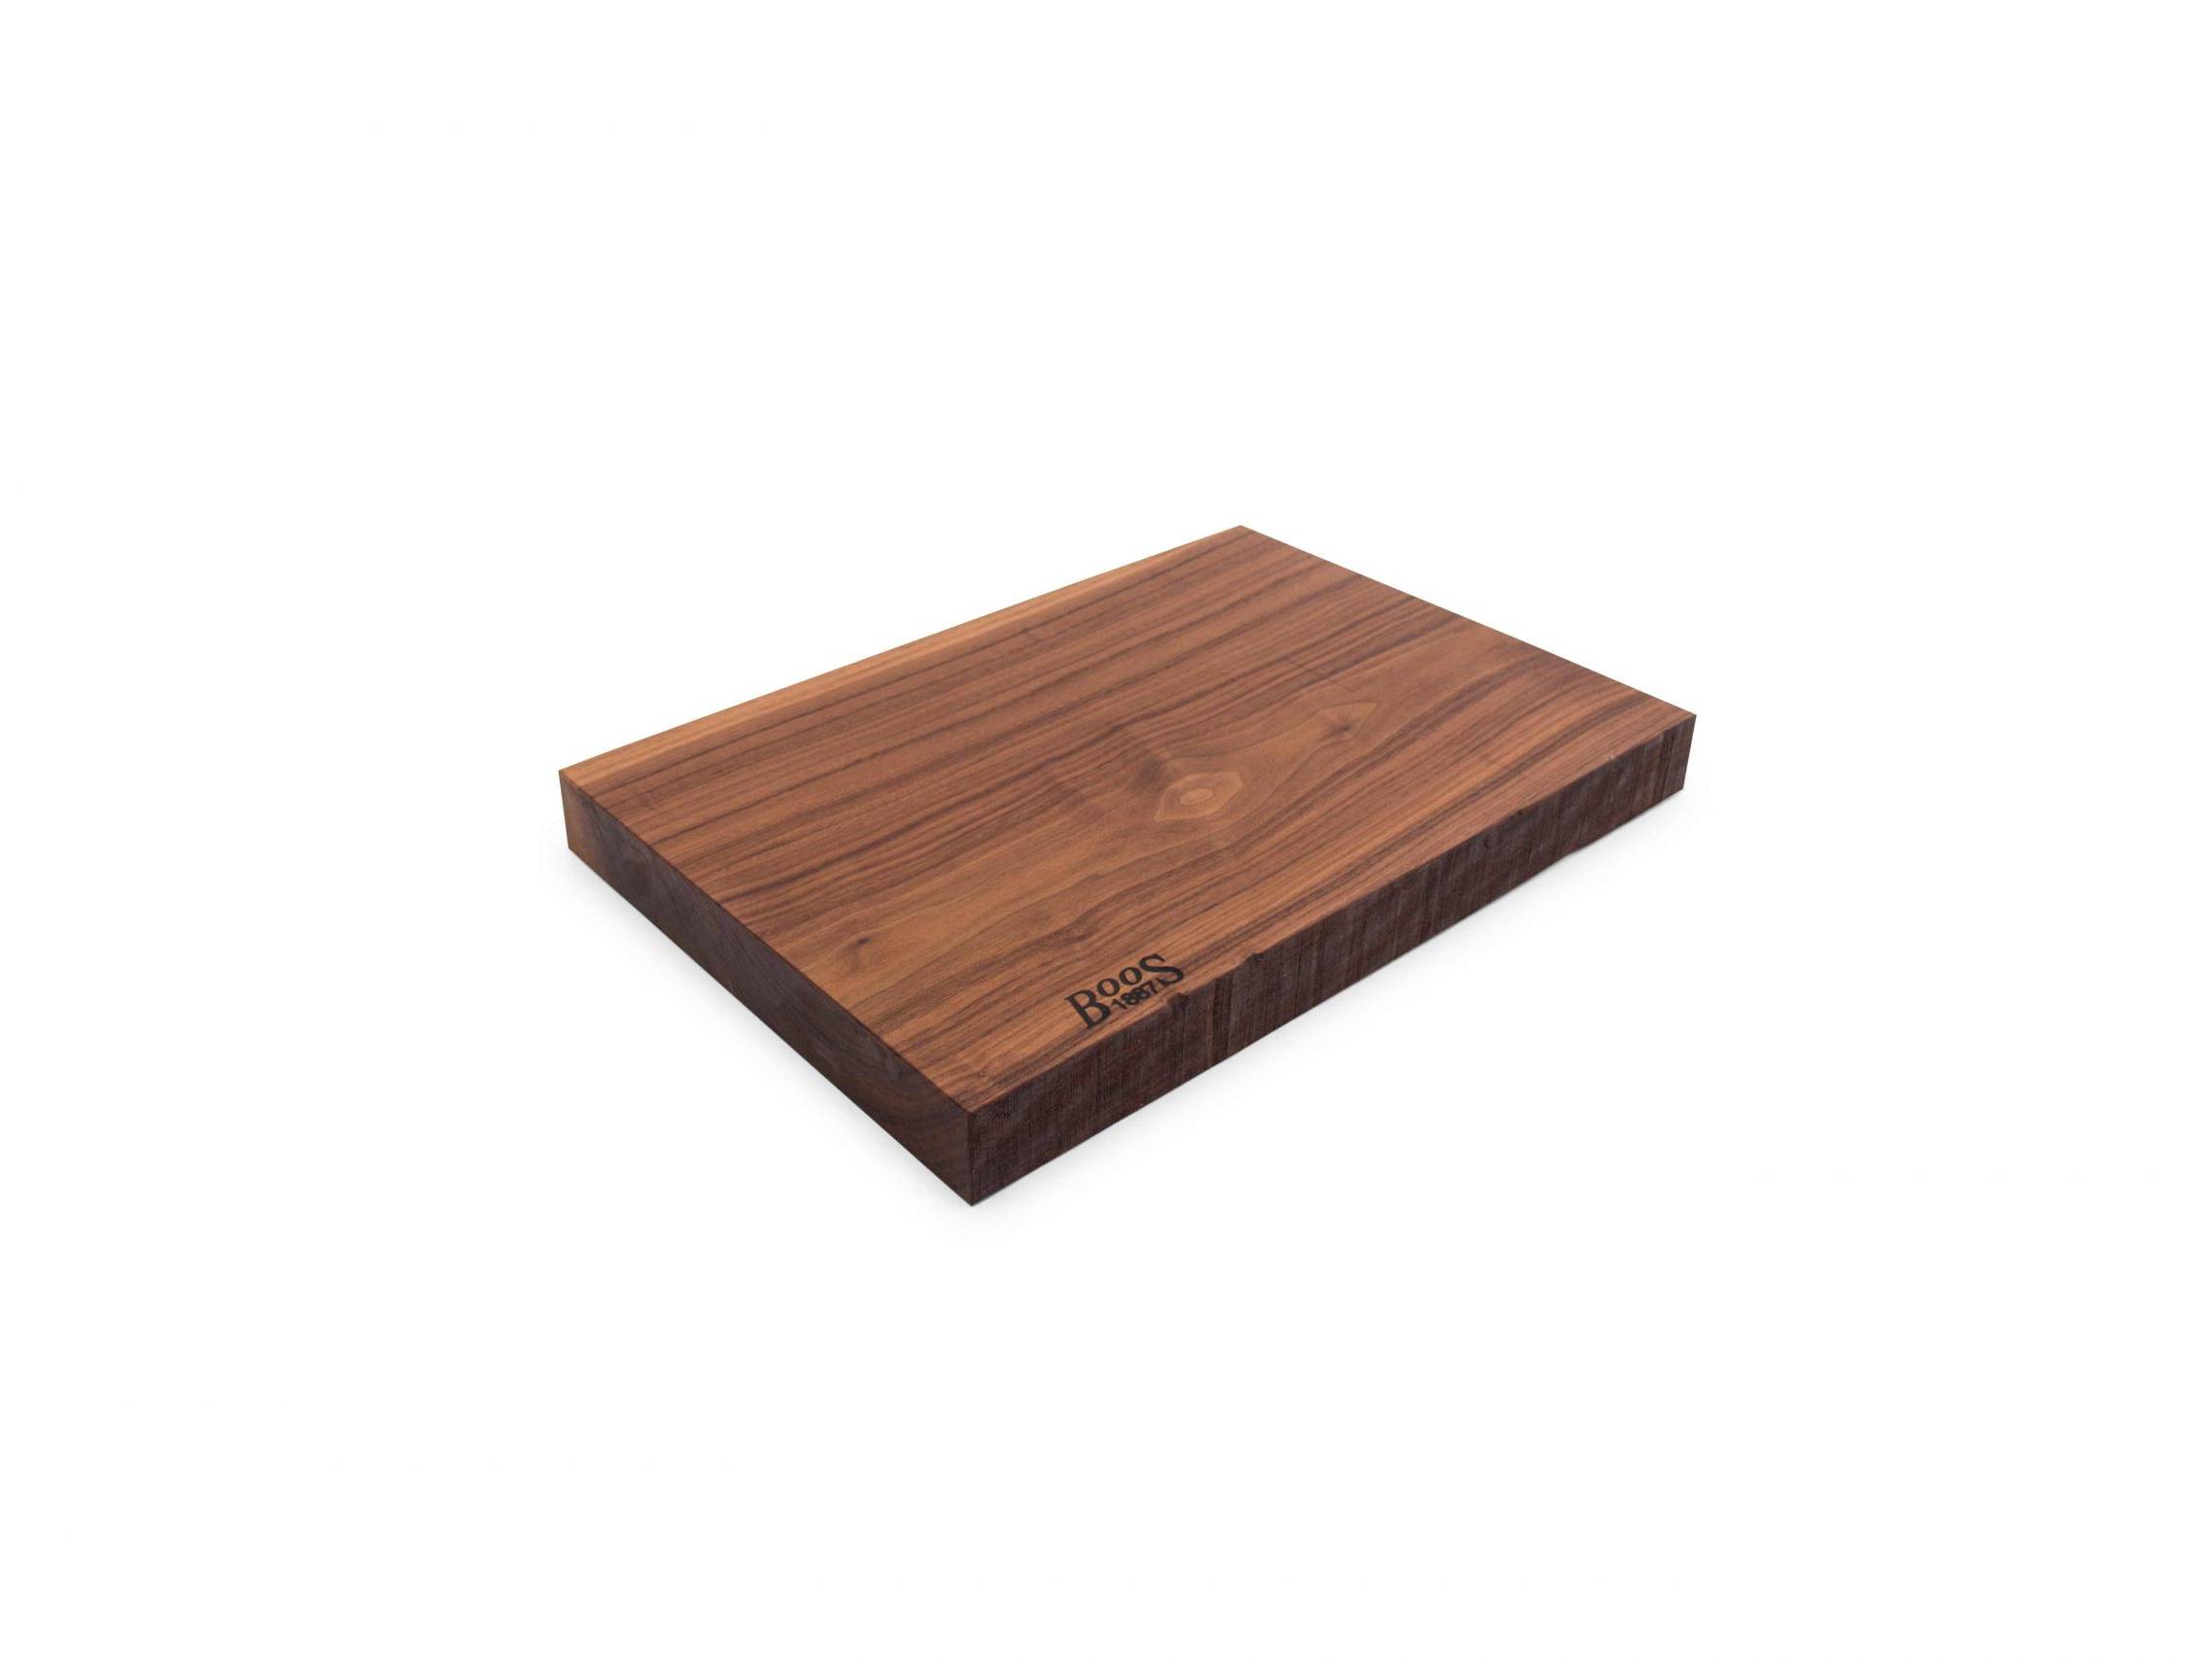 Boos 1887 / Rustic Edge one-piece chopping board; Black Walnut; can be used on both sides 9